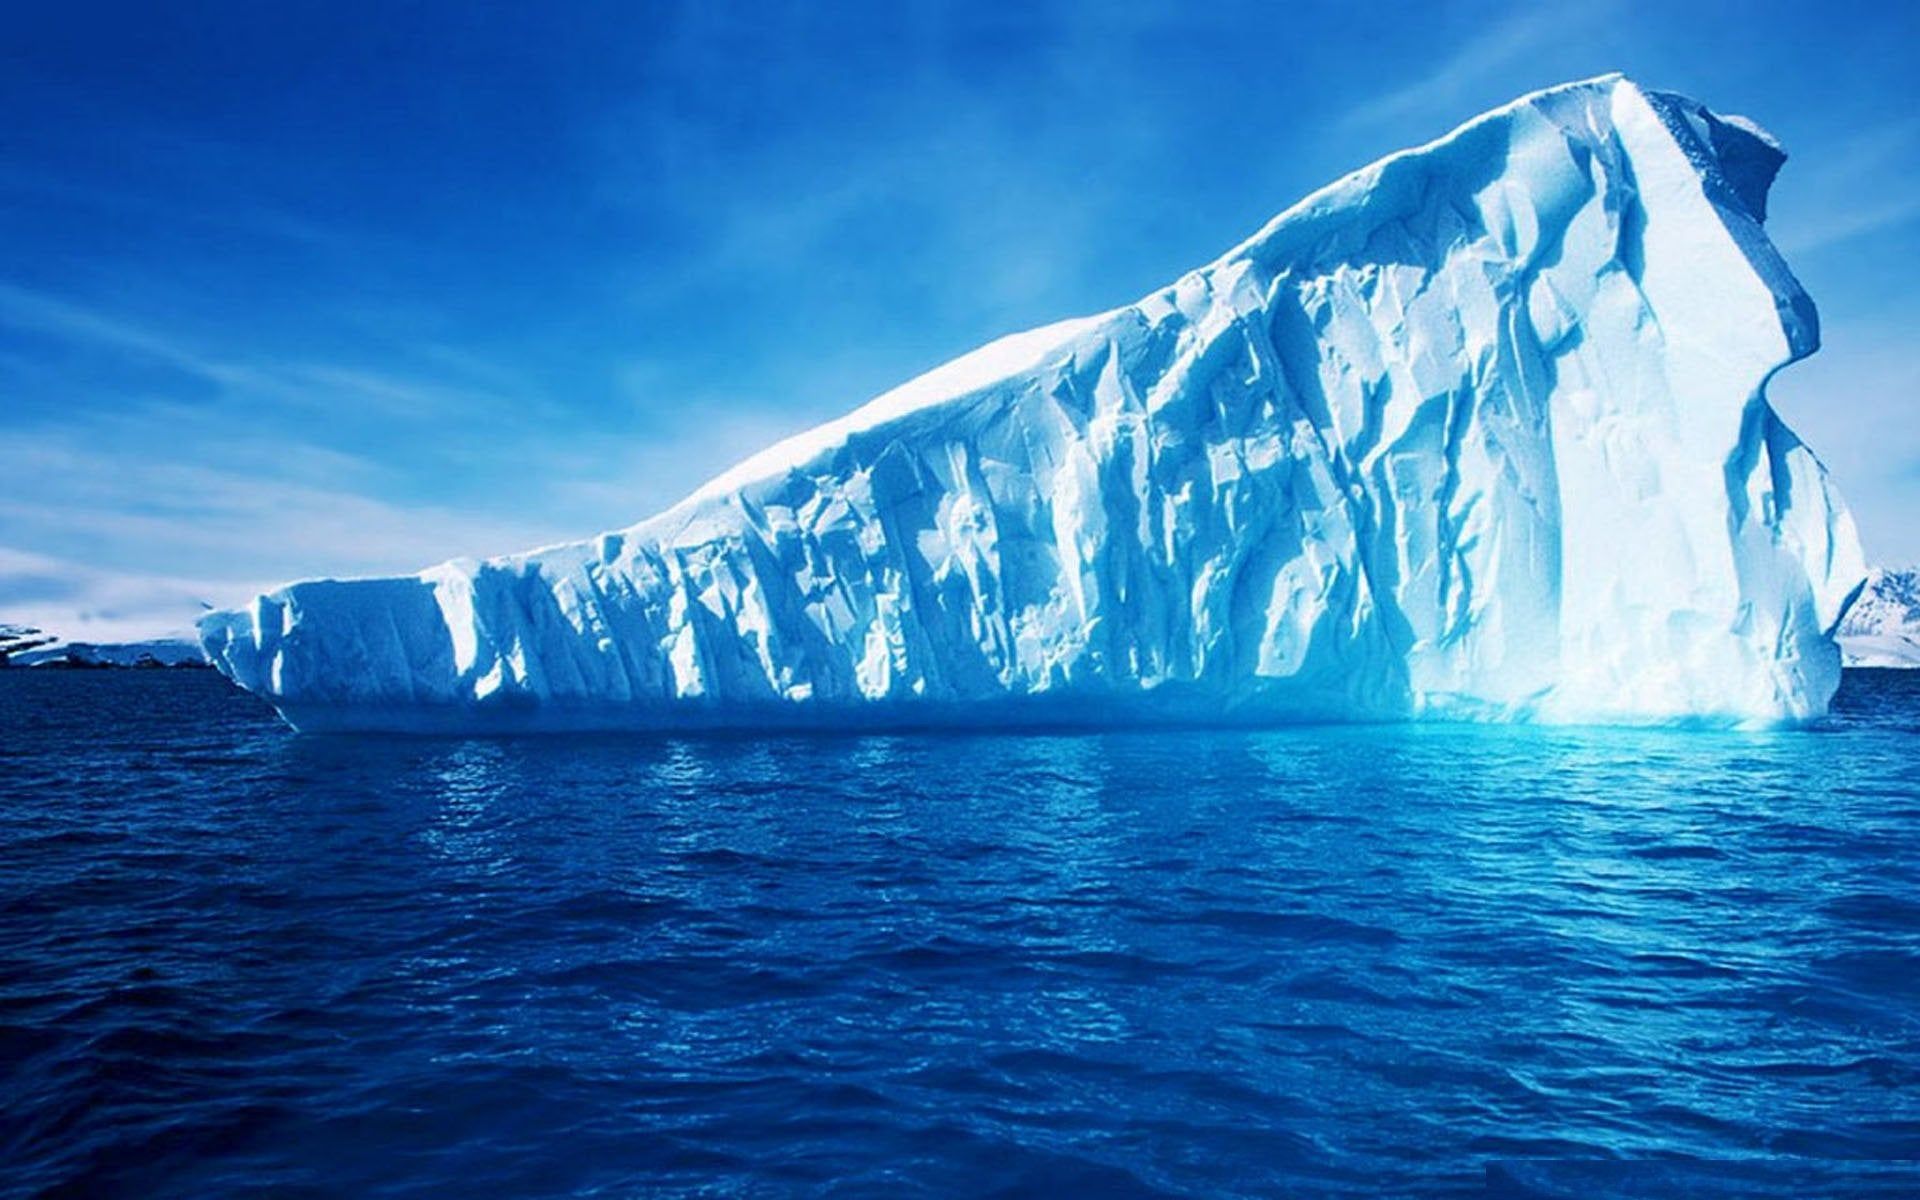 Fantastic Iceberg Wallpaper With Your Friends And Family And Feel